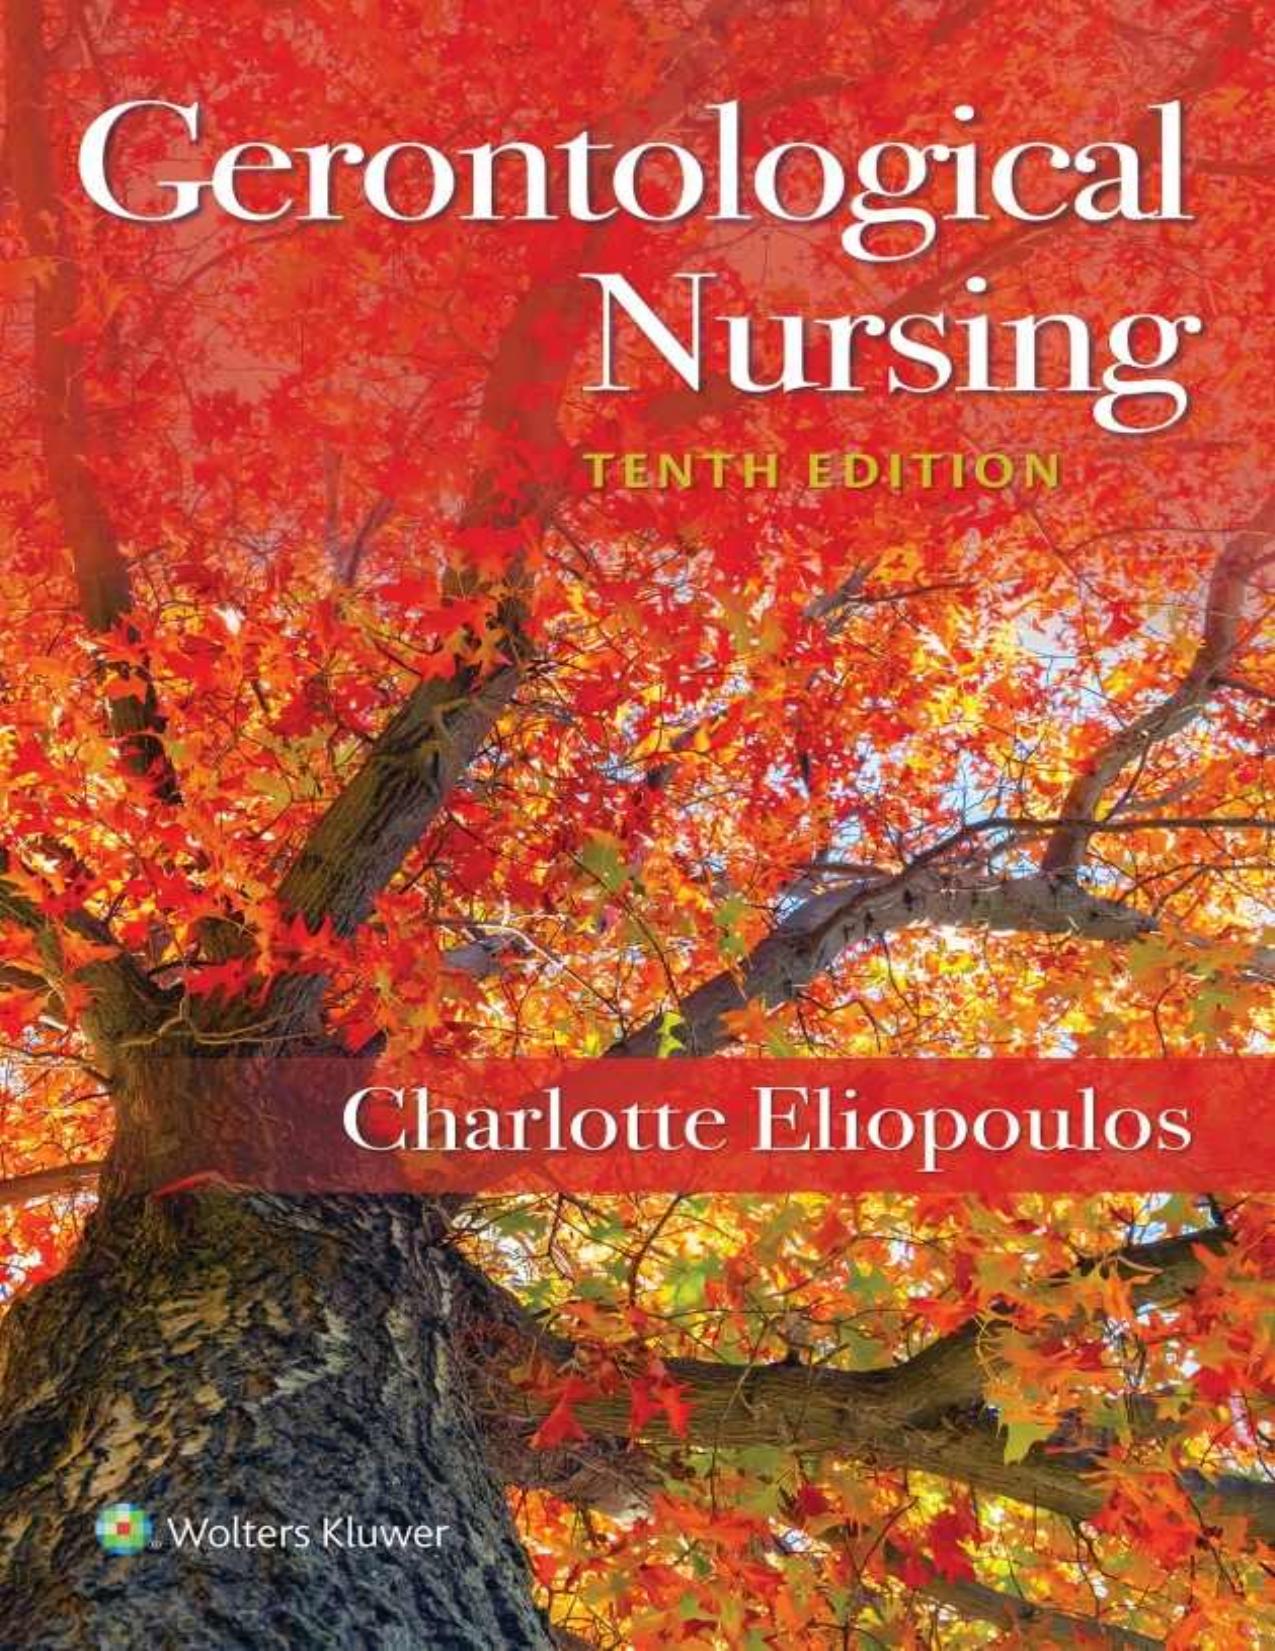 Gerontological Nursing 10th Edition by Charlotte Eliopoulos